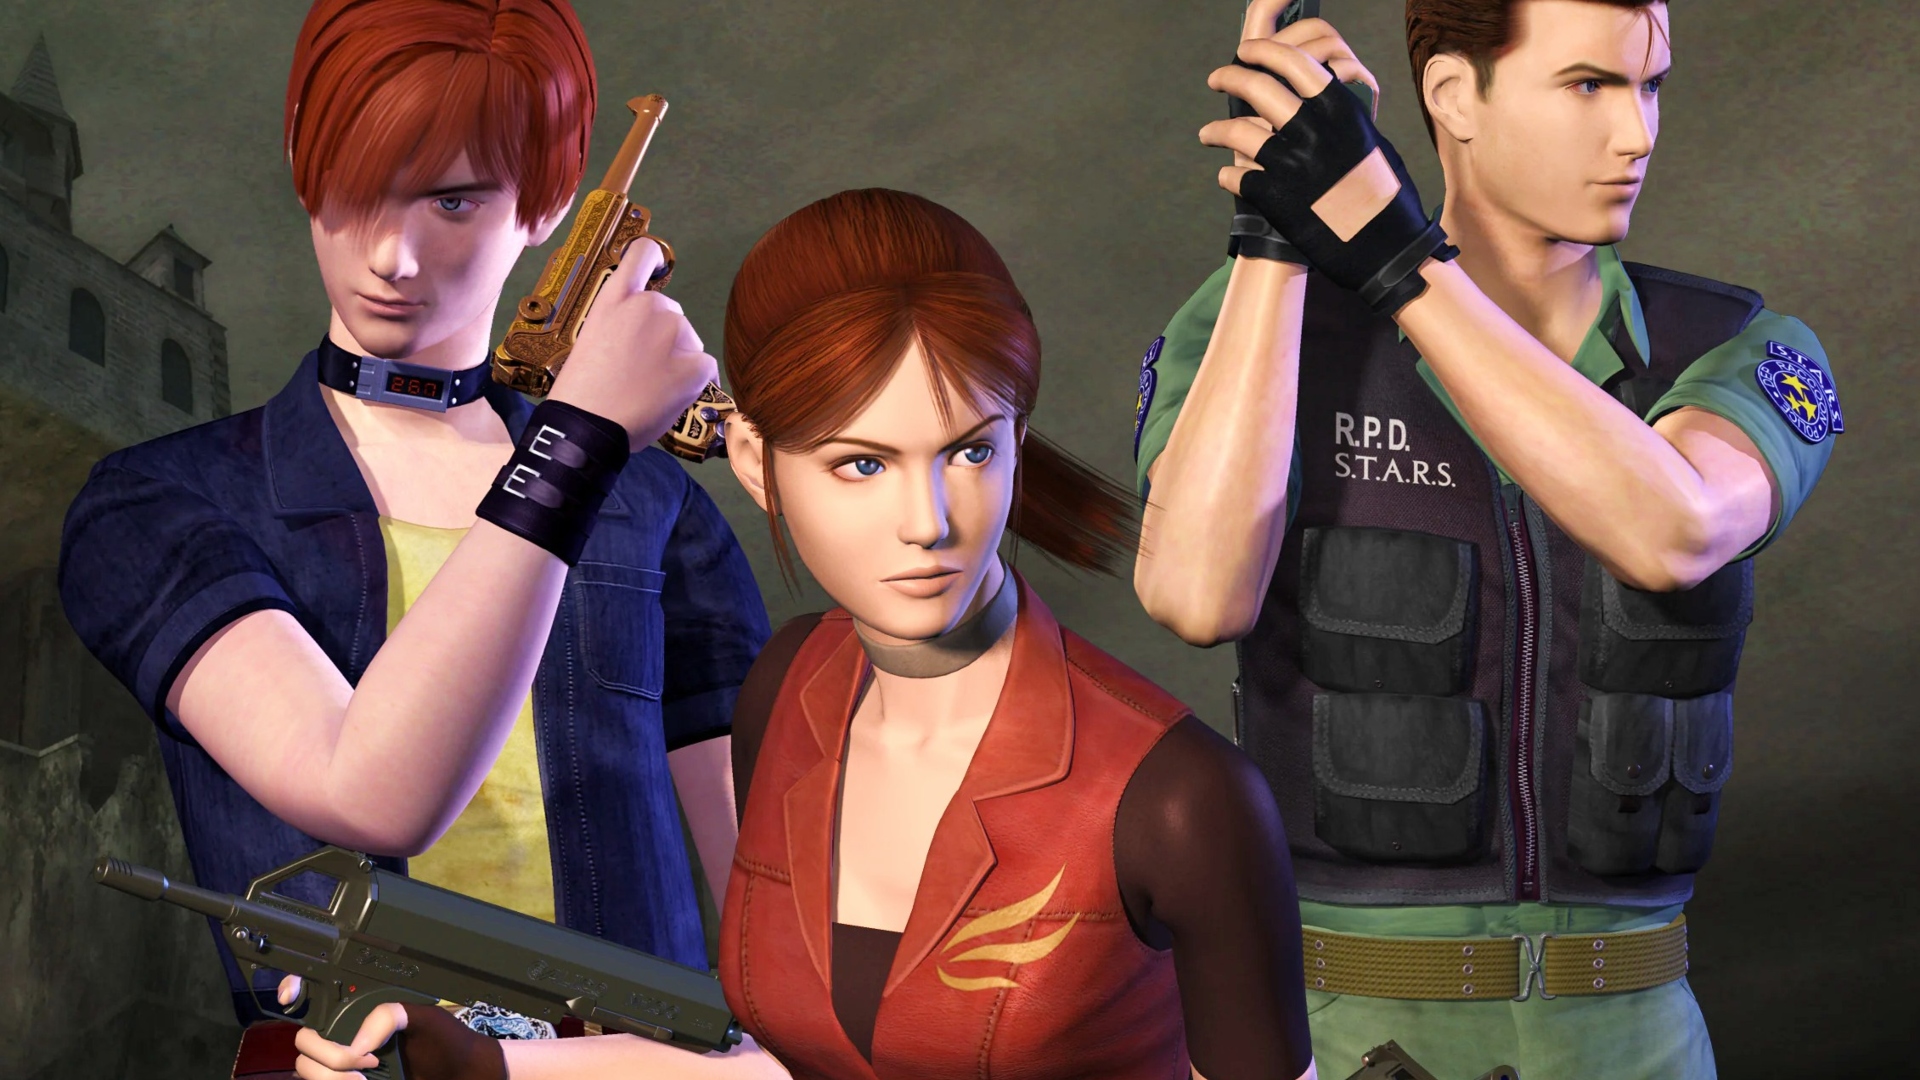 If you want more Resident Evil remakes, Capcom has good news